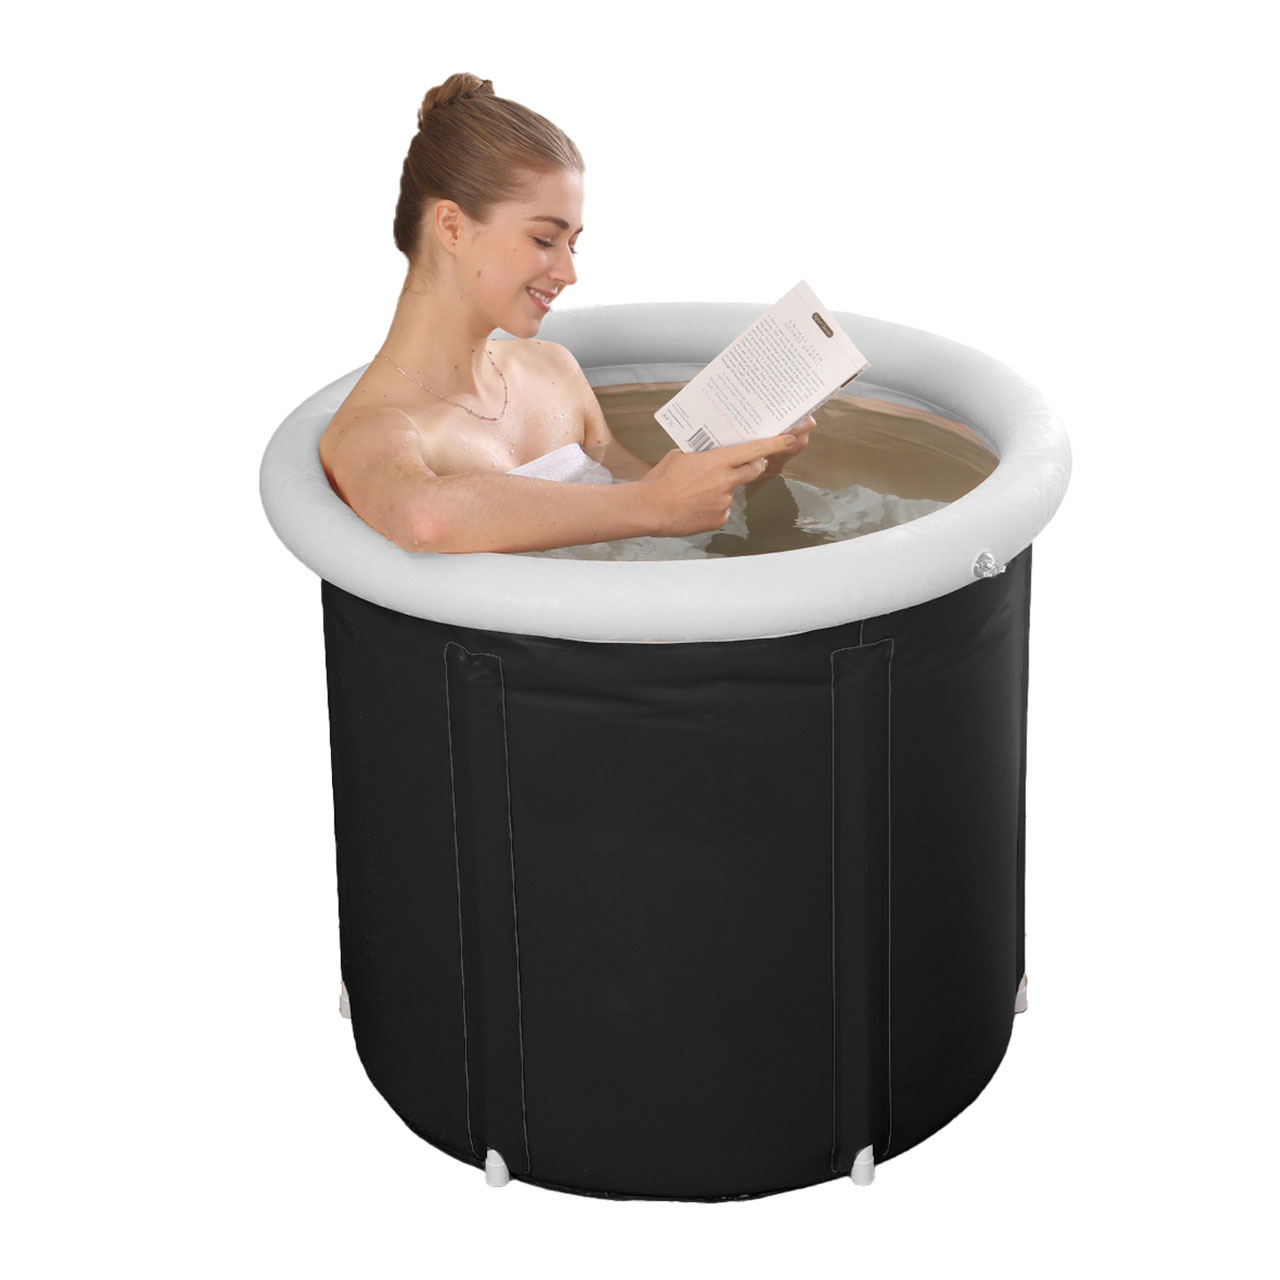 Cleaning and Maintenance of Inflatable Bathtubs